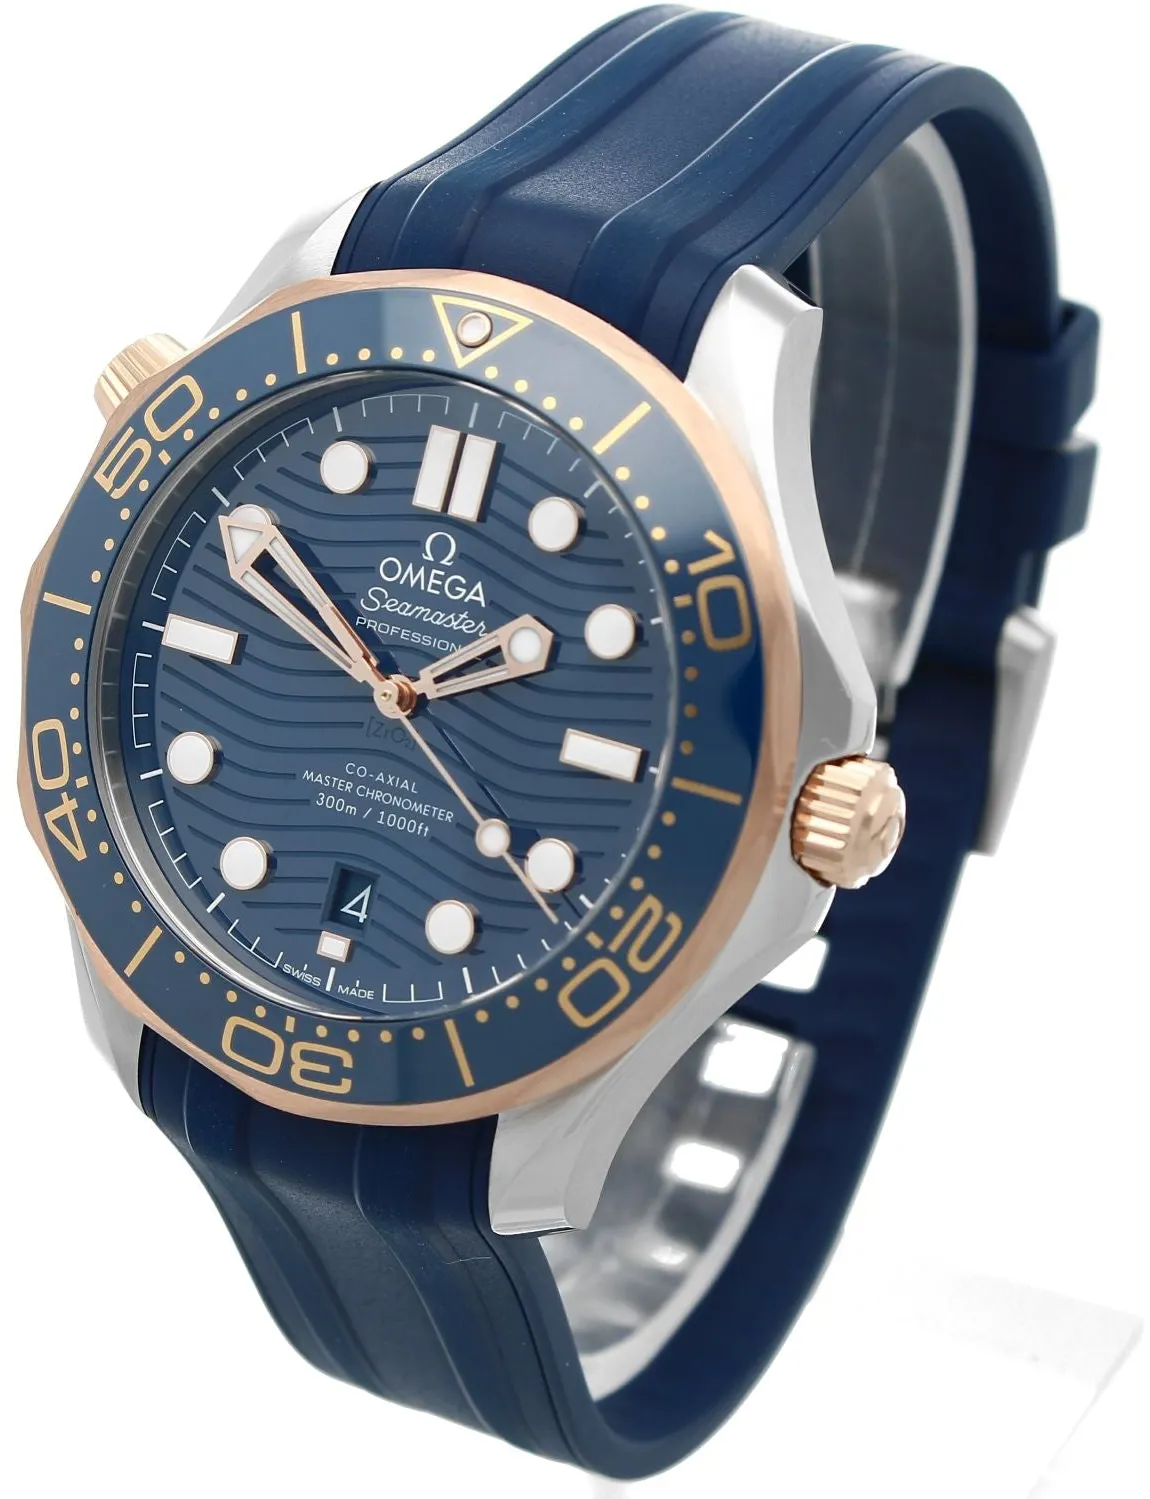 Omega Seamaster Diver 300M 210.22.42.20.03.002 42mm Yellow gold and stainless steel Blue 1